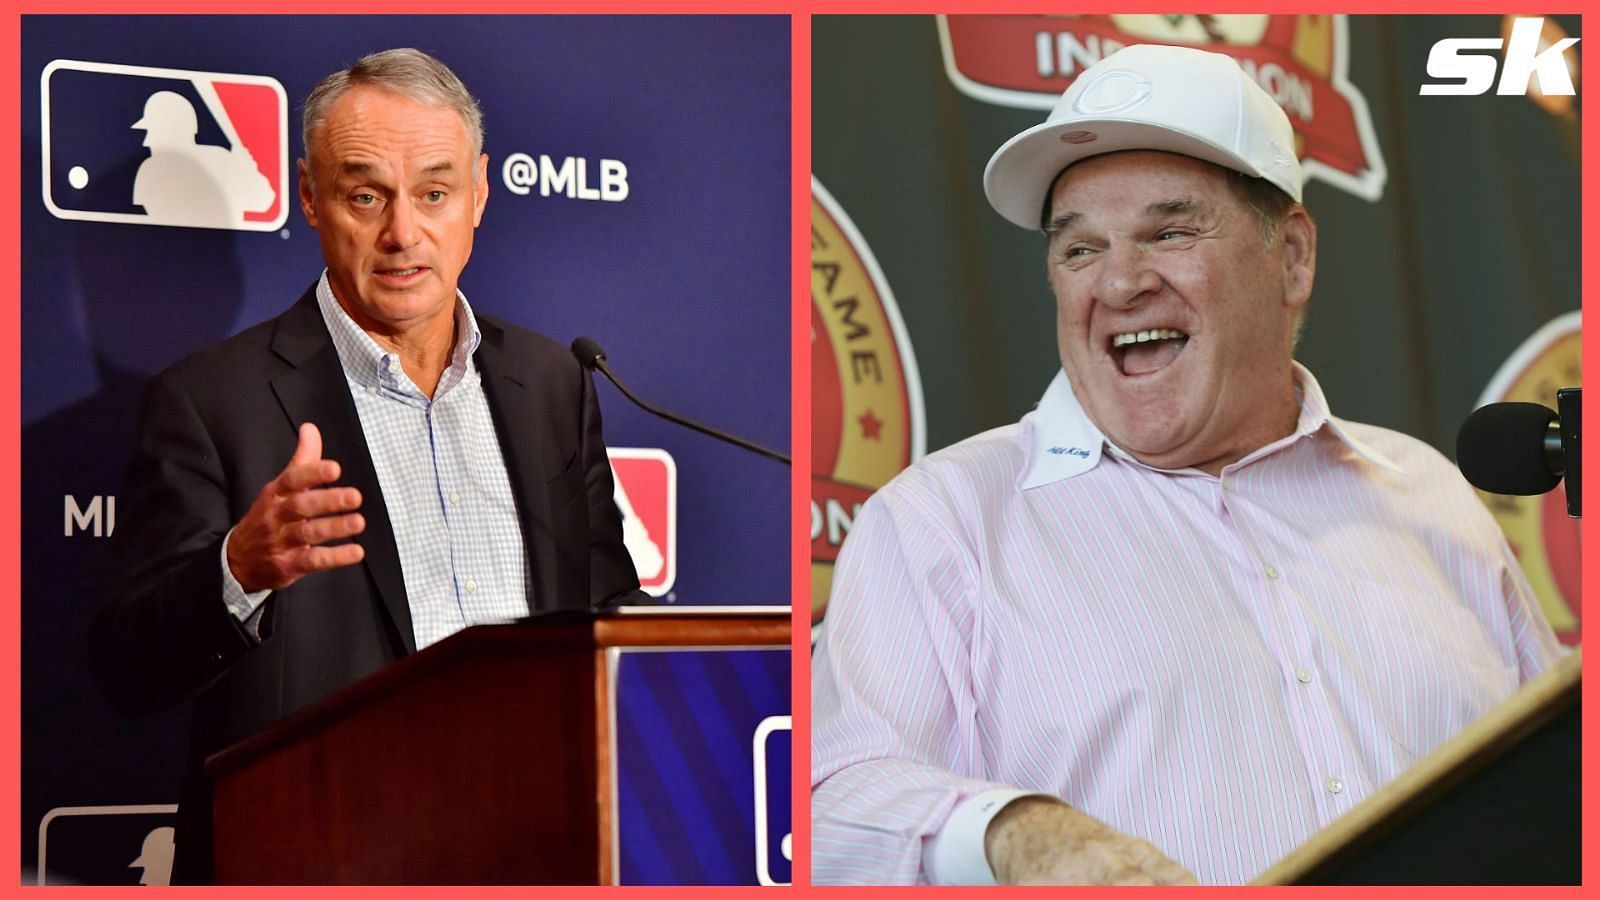 MLB commissioner Rob Manfred quashes possibility of Pete Rose